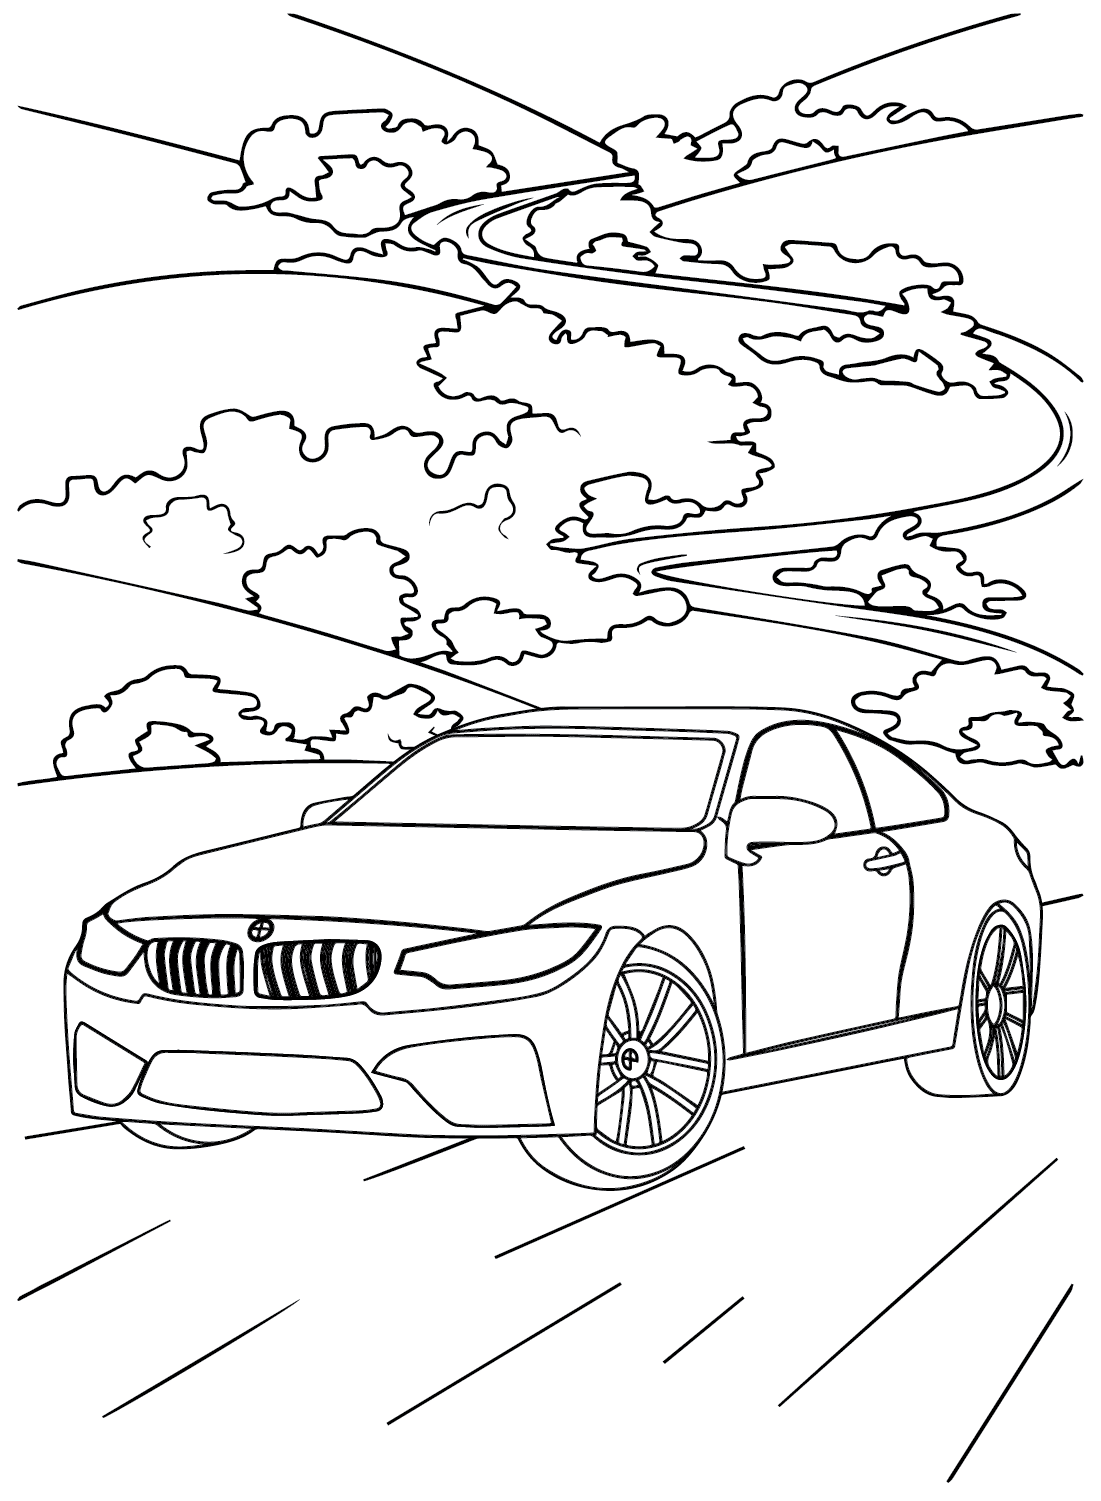 BMW M4 Coloring Page from BMW